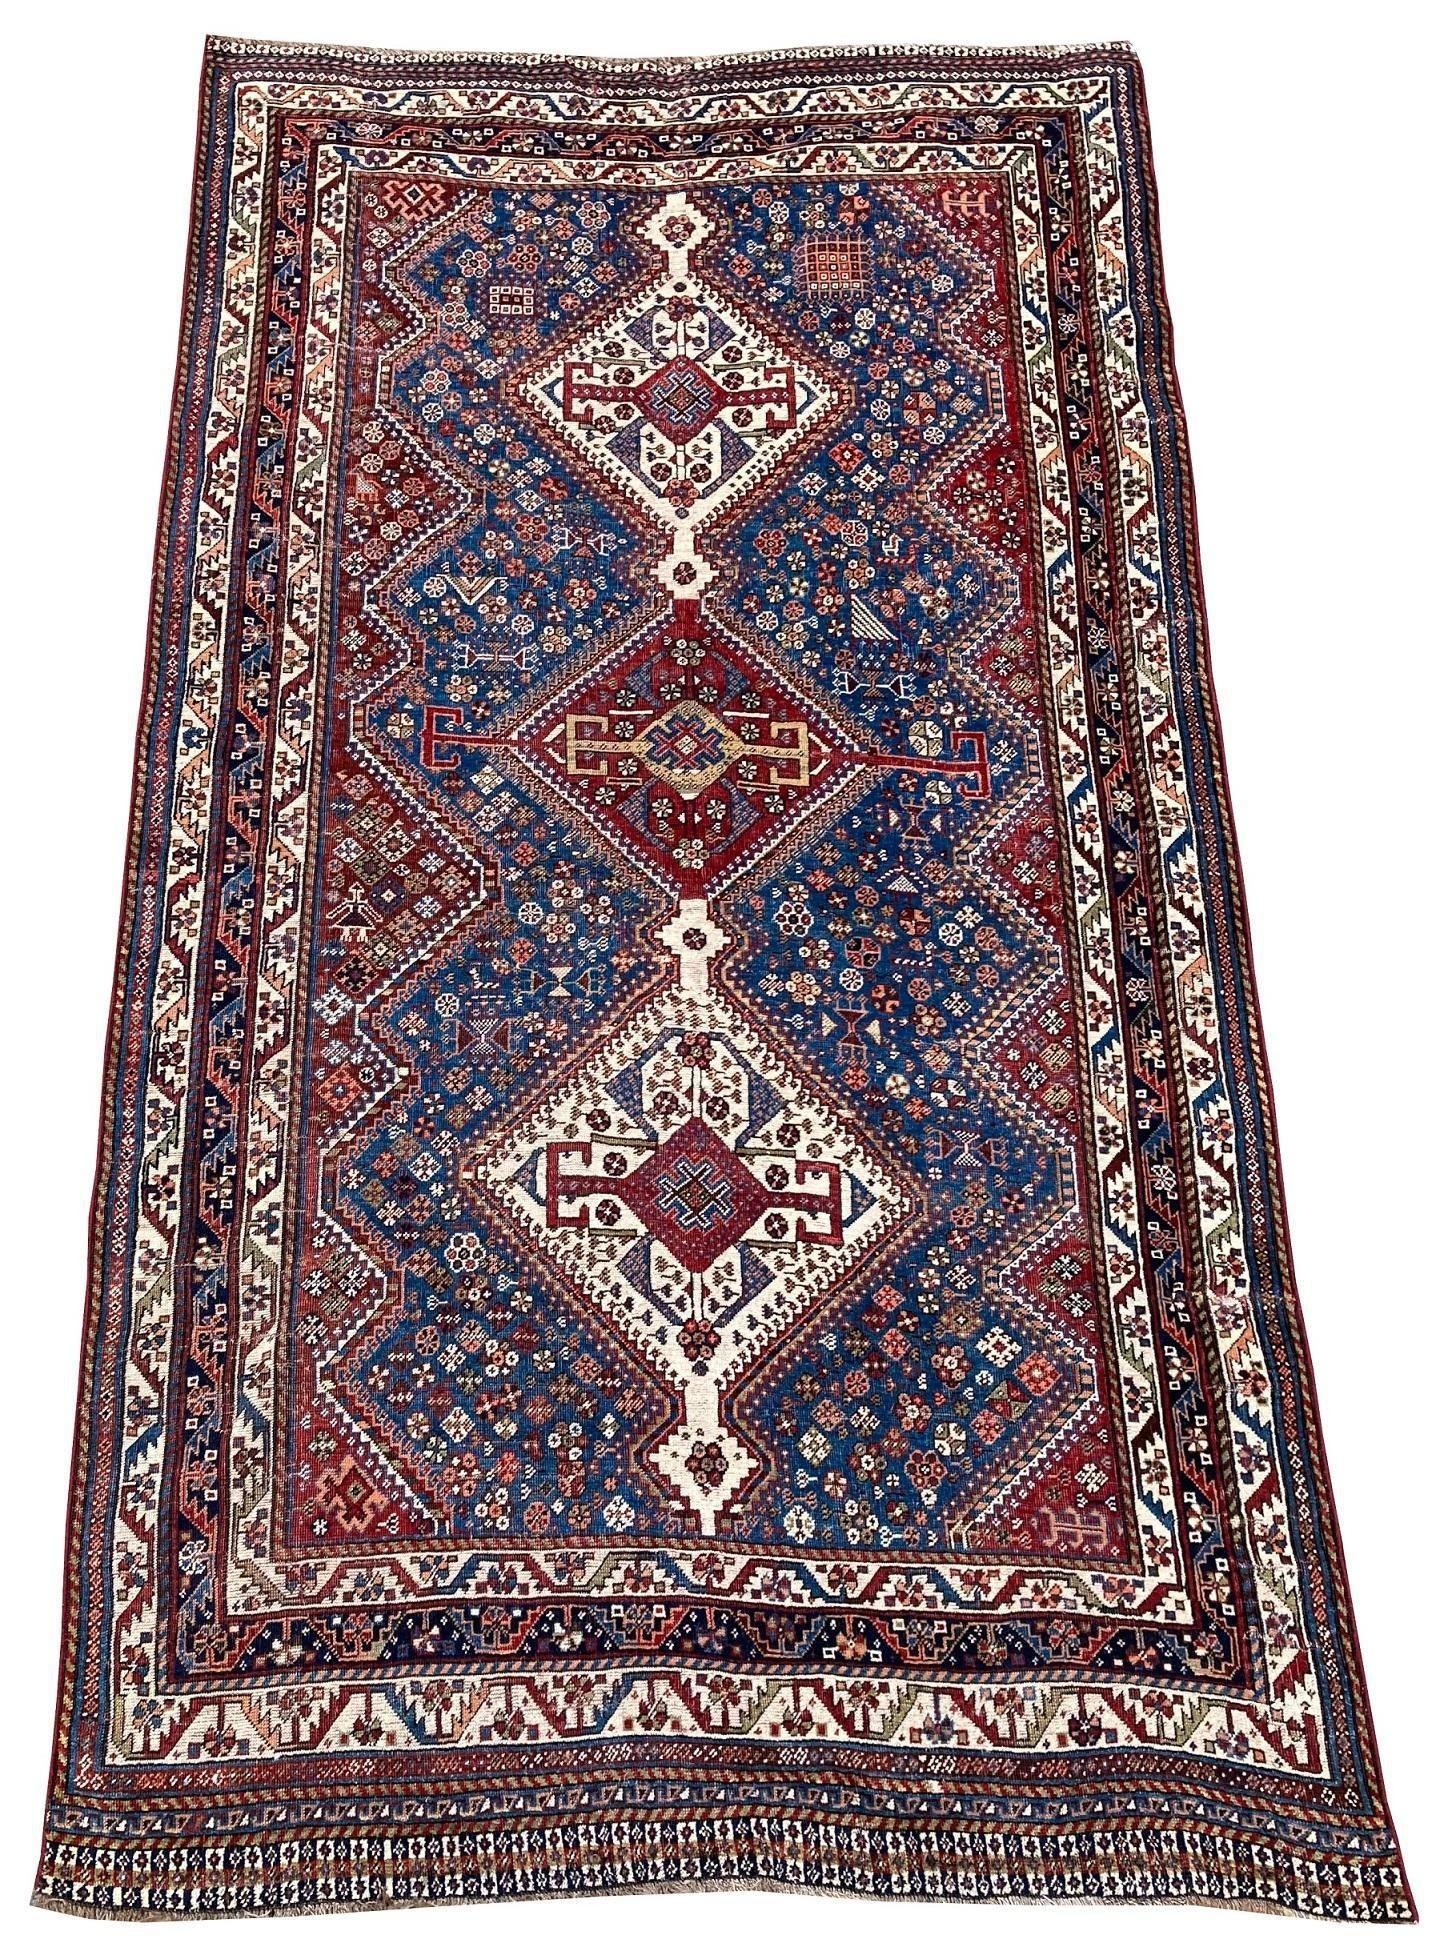 A fabulous antique Qashqai rug, handwoven by the eponymous nomadic tribe circa 1900 with a 3 medallion design on a navy blue field and great secondary colours. Note the small figures throughout the field (see photos).
Size: 2.54m x 1.41m (8ft 4in x